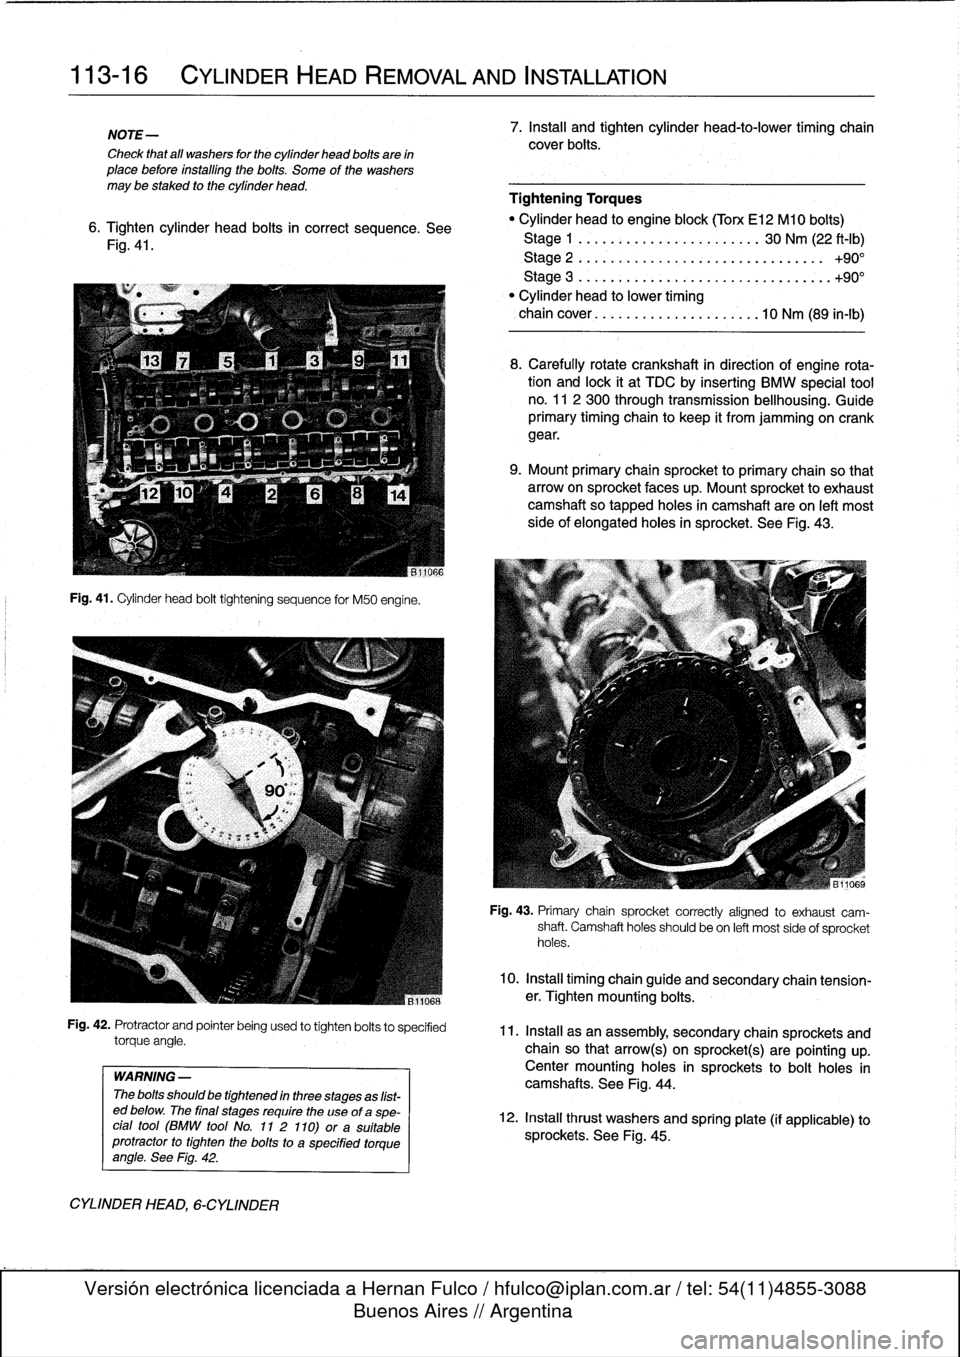 BMW 325i 1994 E36 Owners Guide 
113-16

	

CYLINDER
HEAD
REMOVAL
AND
INSTALLATION

NOTE-

Check
that
all
washers
for
the
cylinder
head
bolts
are
in
place
before
installlng
the
bolts
.
Some
of
the
washers
may
be
staked
to
the
cylind